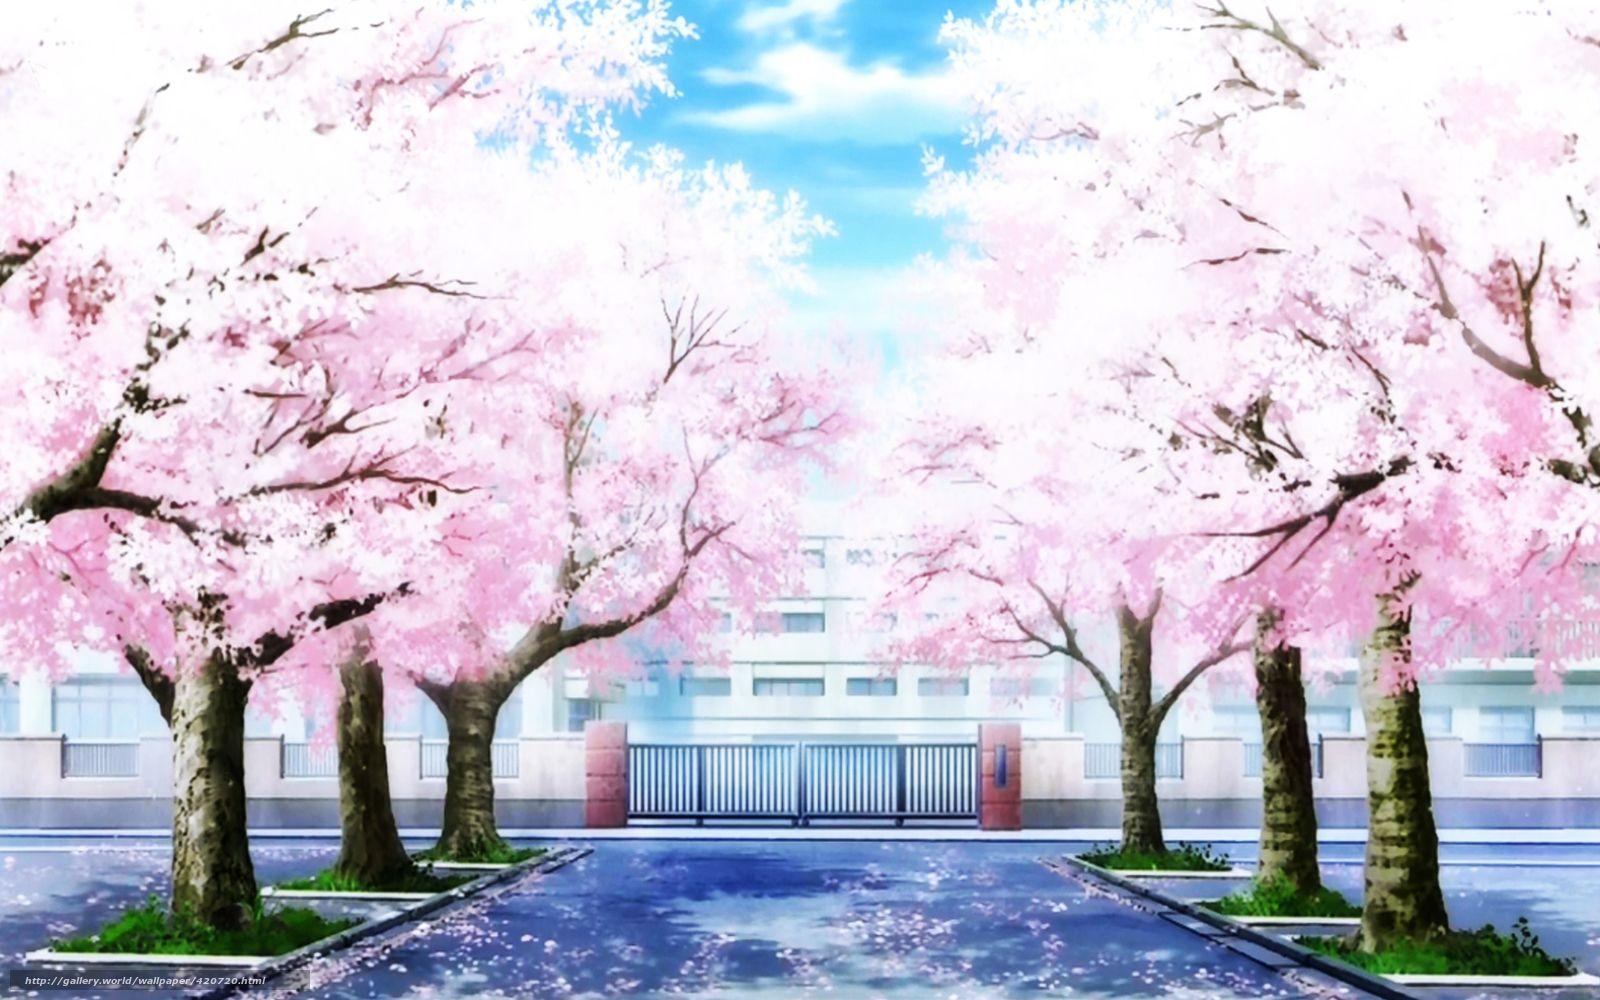 Cherry Blossoms Anime Scenery Wallpapers - Top Free Cherry ...